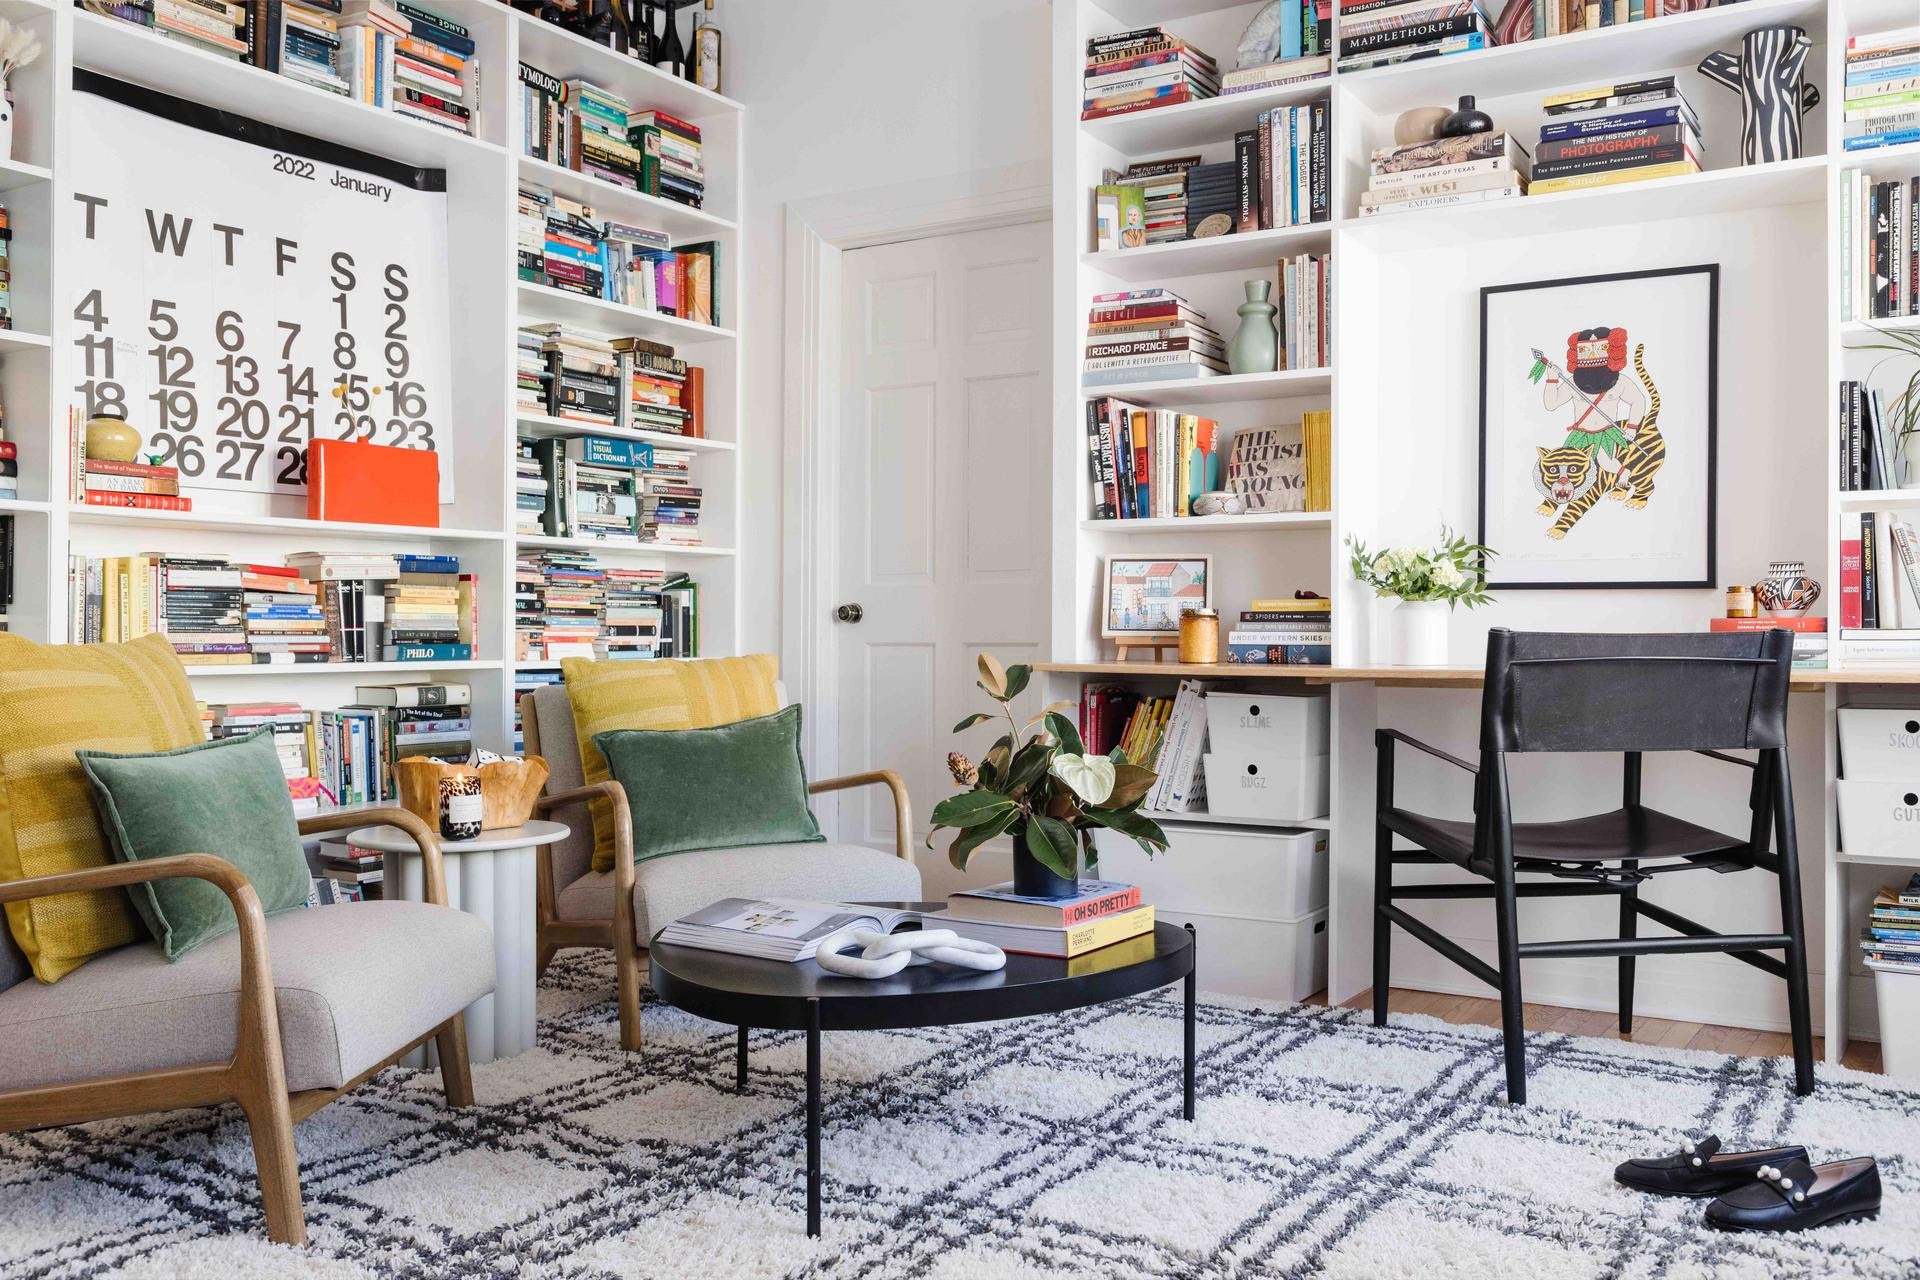 8 Home Office Decor Ideas That Will Give Your Coworkers Zoom Background  Envy | Havenly Blog | Havenly Interior Design Blog